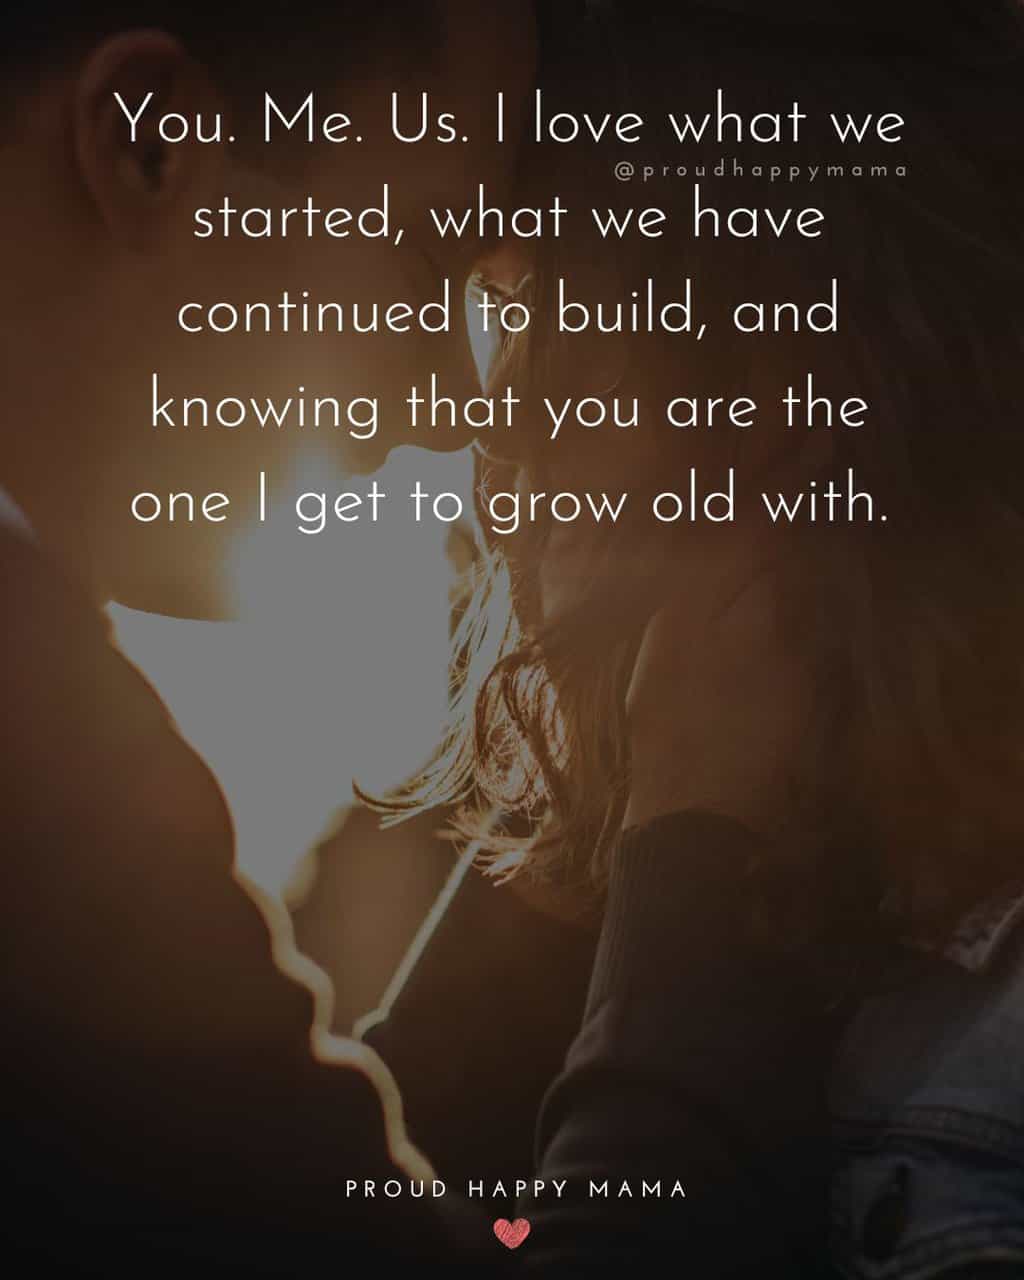 Husband with two hands on wife's face with foreheads touching and a husband wife quote text overlay. ‘You. Me. Us. I love what we started, what we have continued to build, and knowing that you are the one I get to grow old with.’